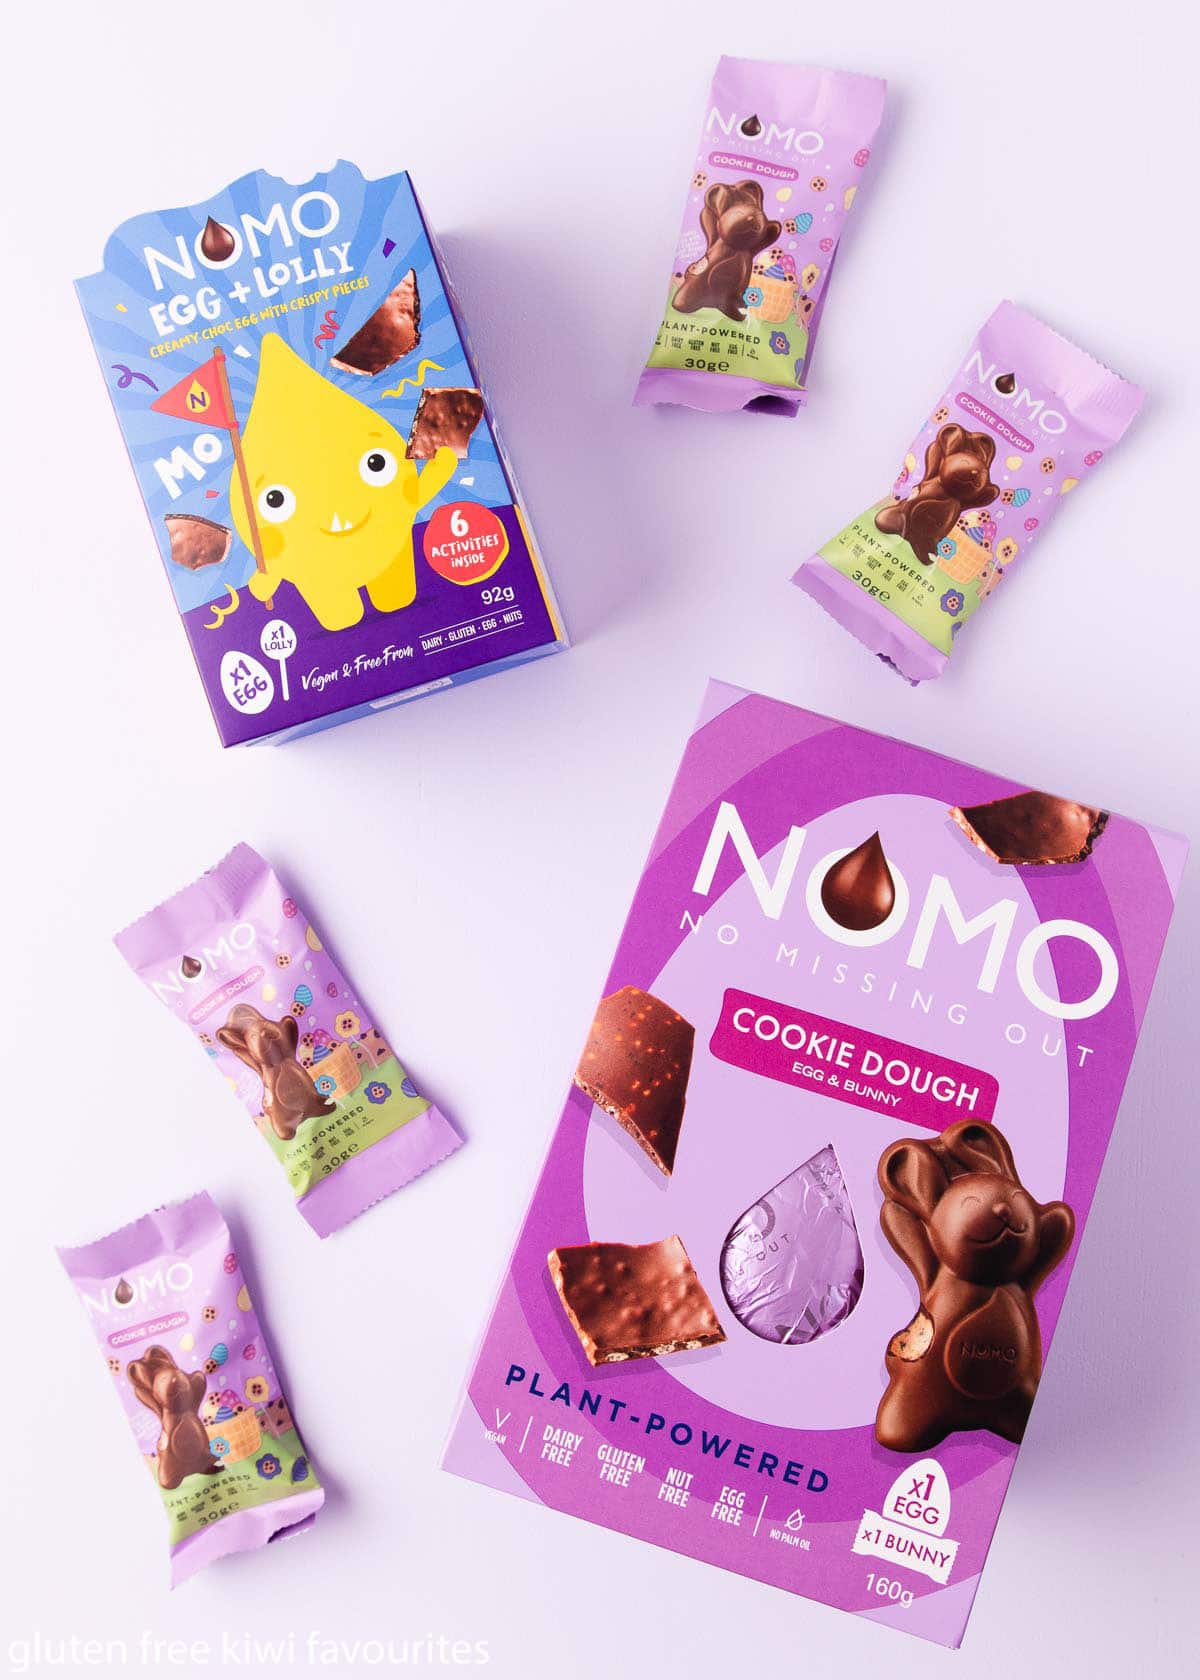 NOMO cookie dough egg and egg + lolly boxes on a light purple background.